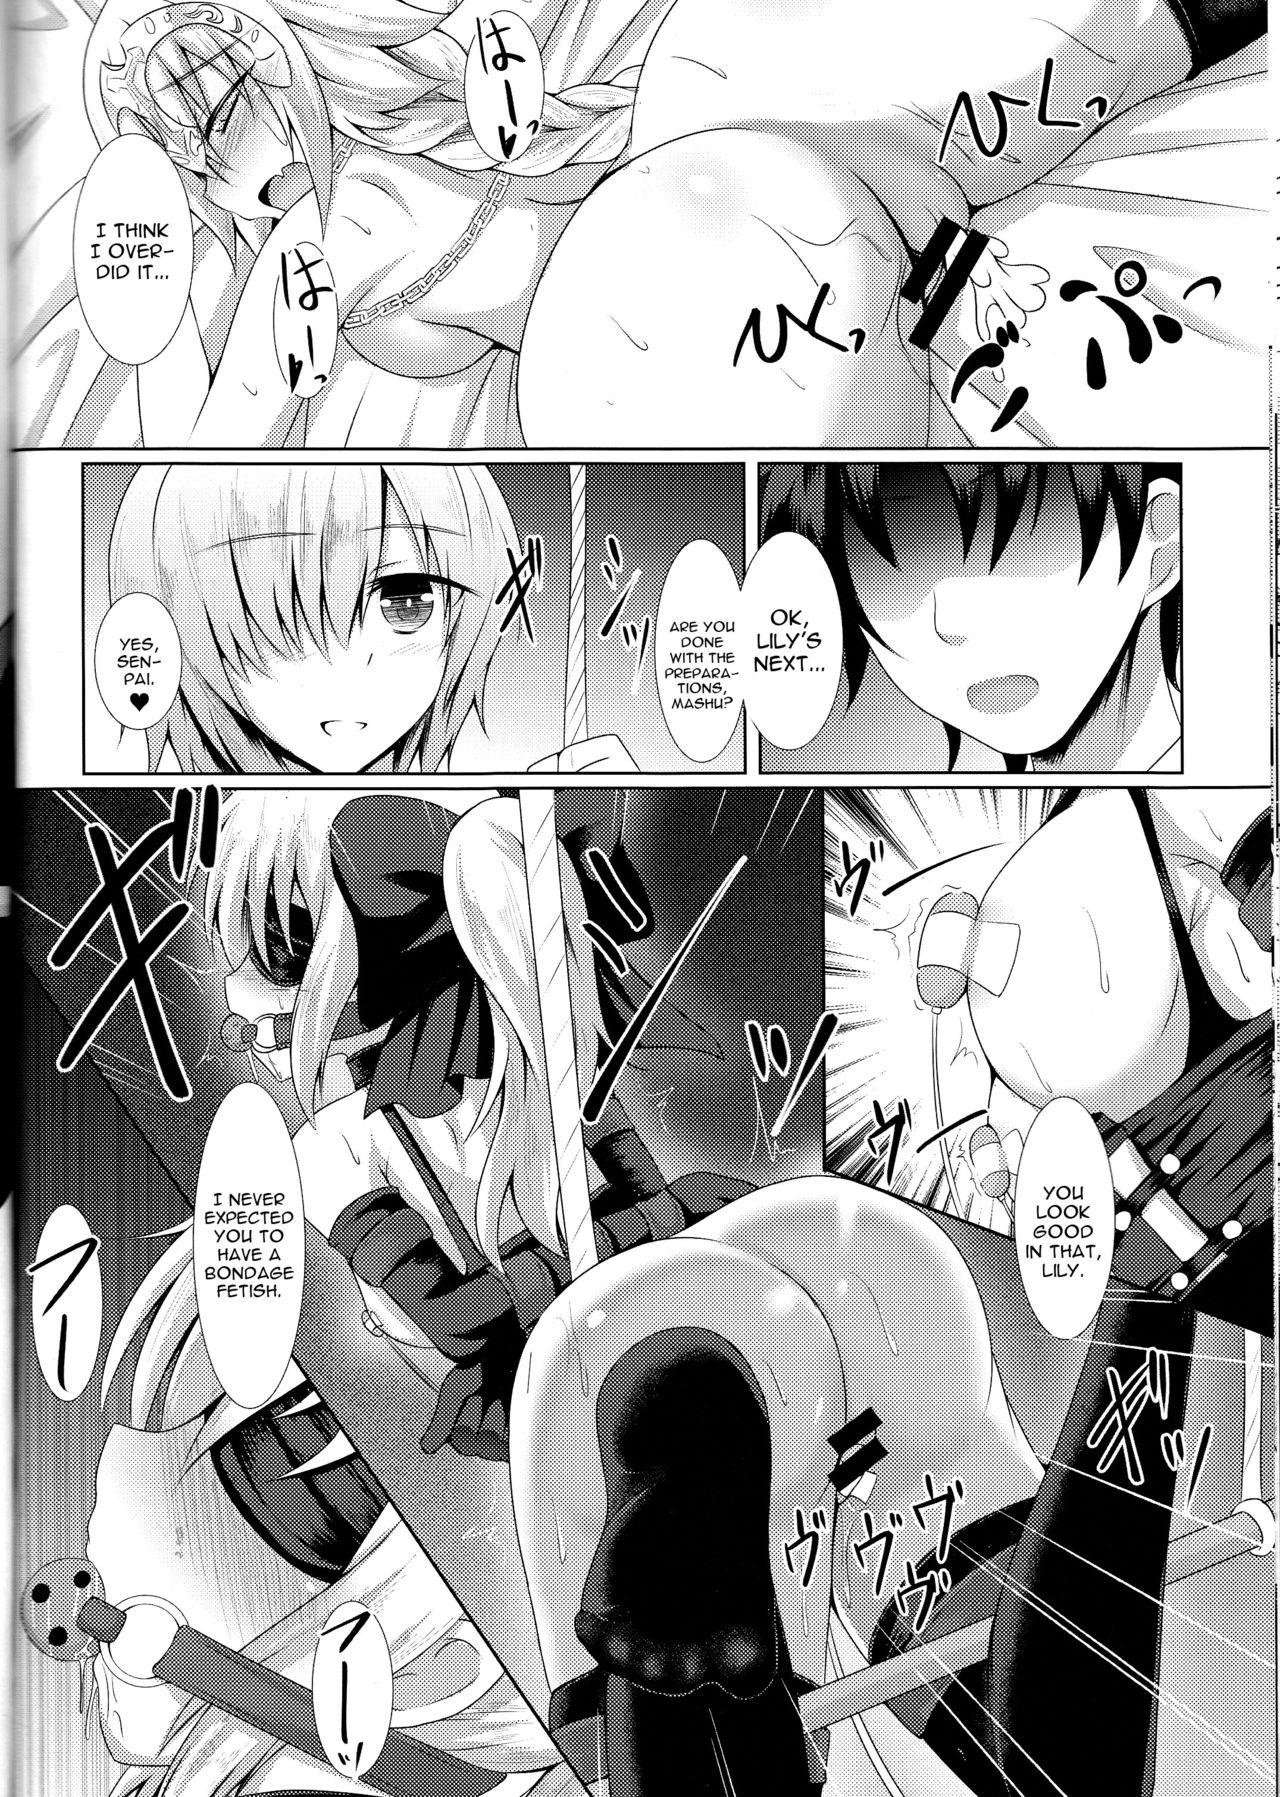 Piss Order of Night - Fate grand order Nasty Porn - Page 13